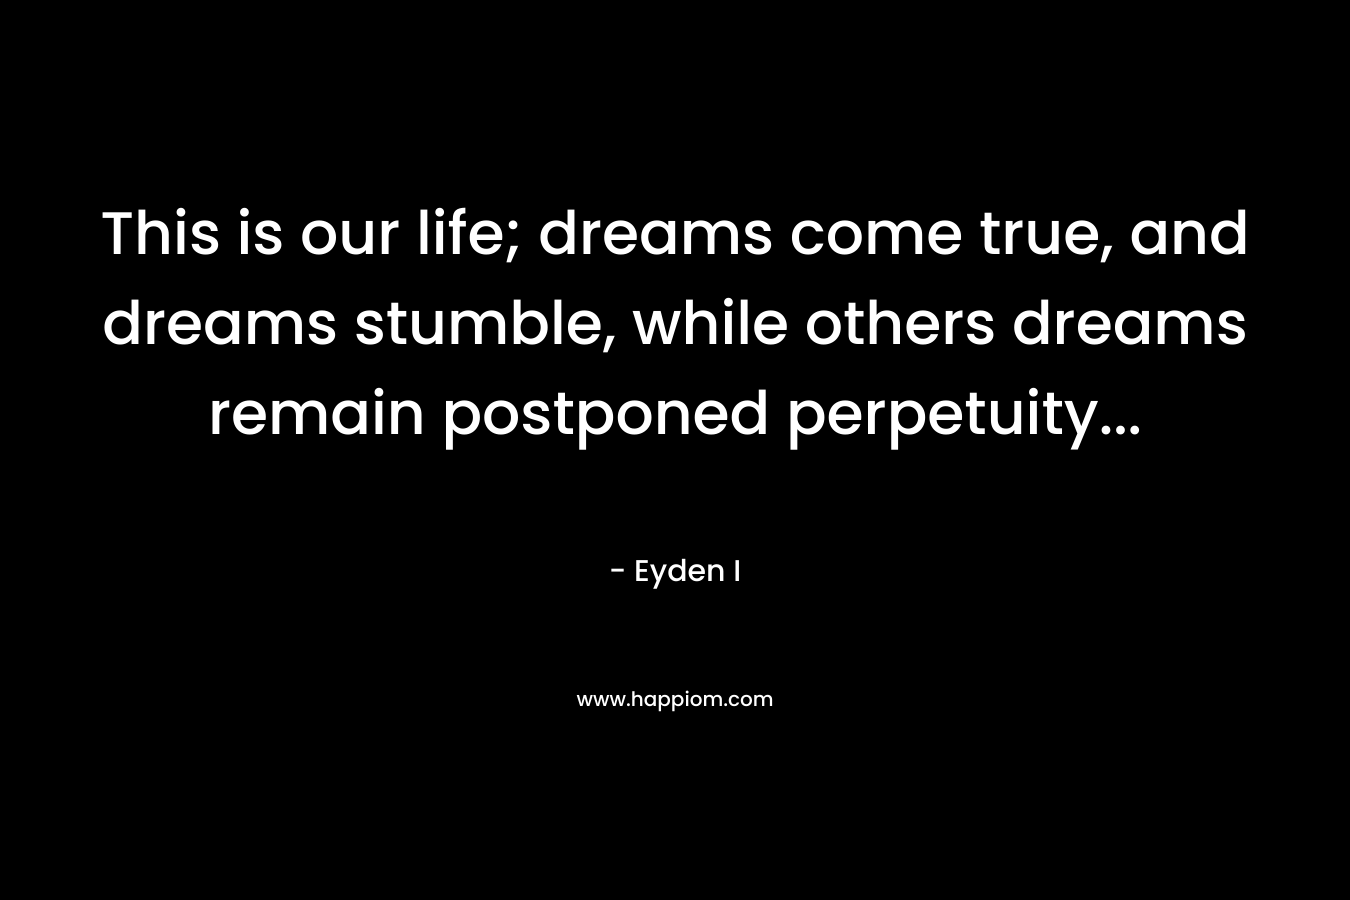 This is our life; dreams come true, and dreams stumble, while others dreams remain postponed perpetuity...